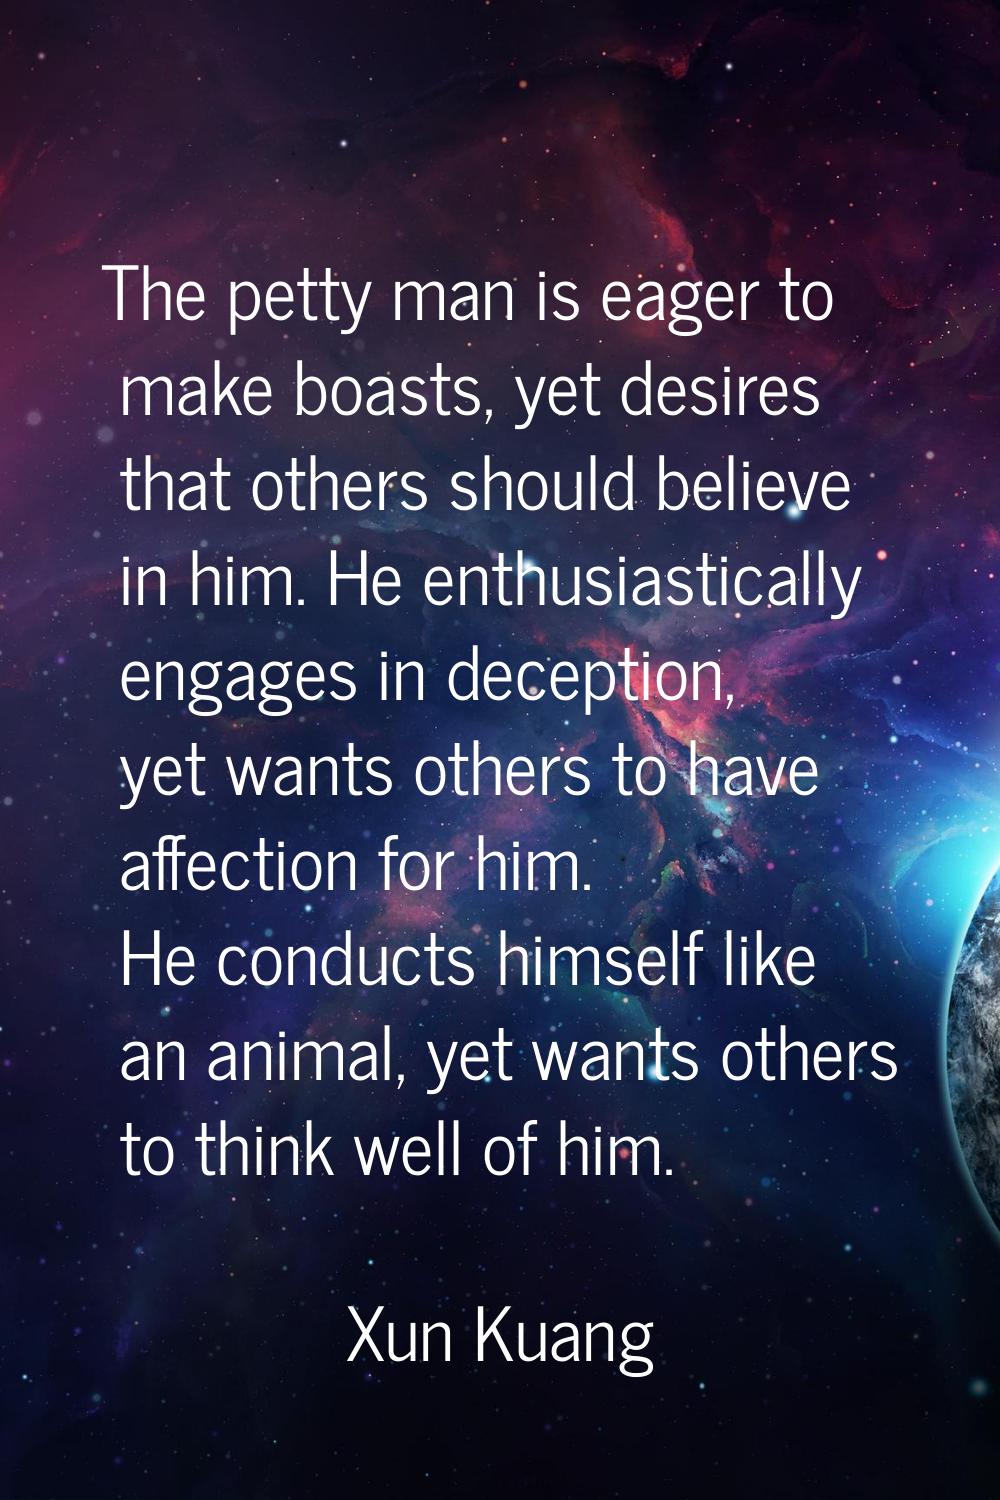 The petty man is eager to make boasts, yet desires that others should believe in him. He enthusiast